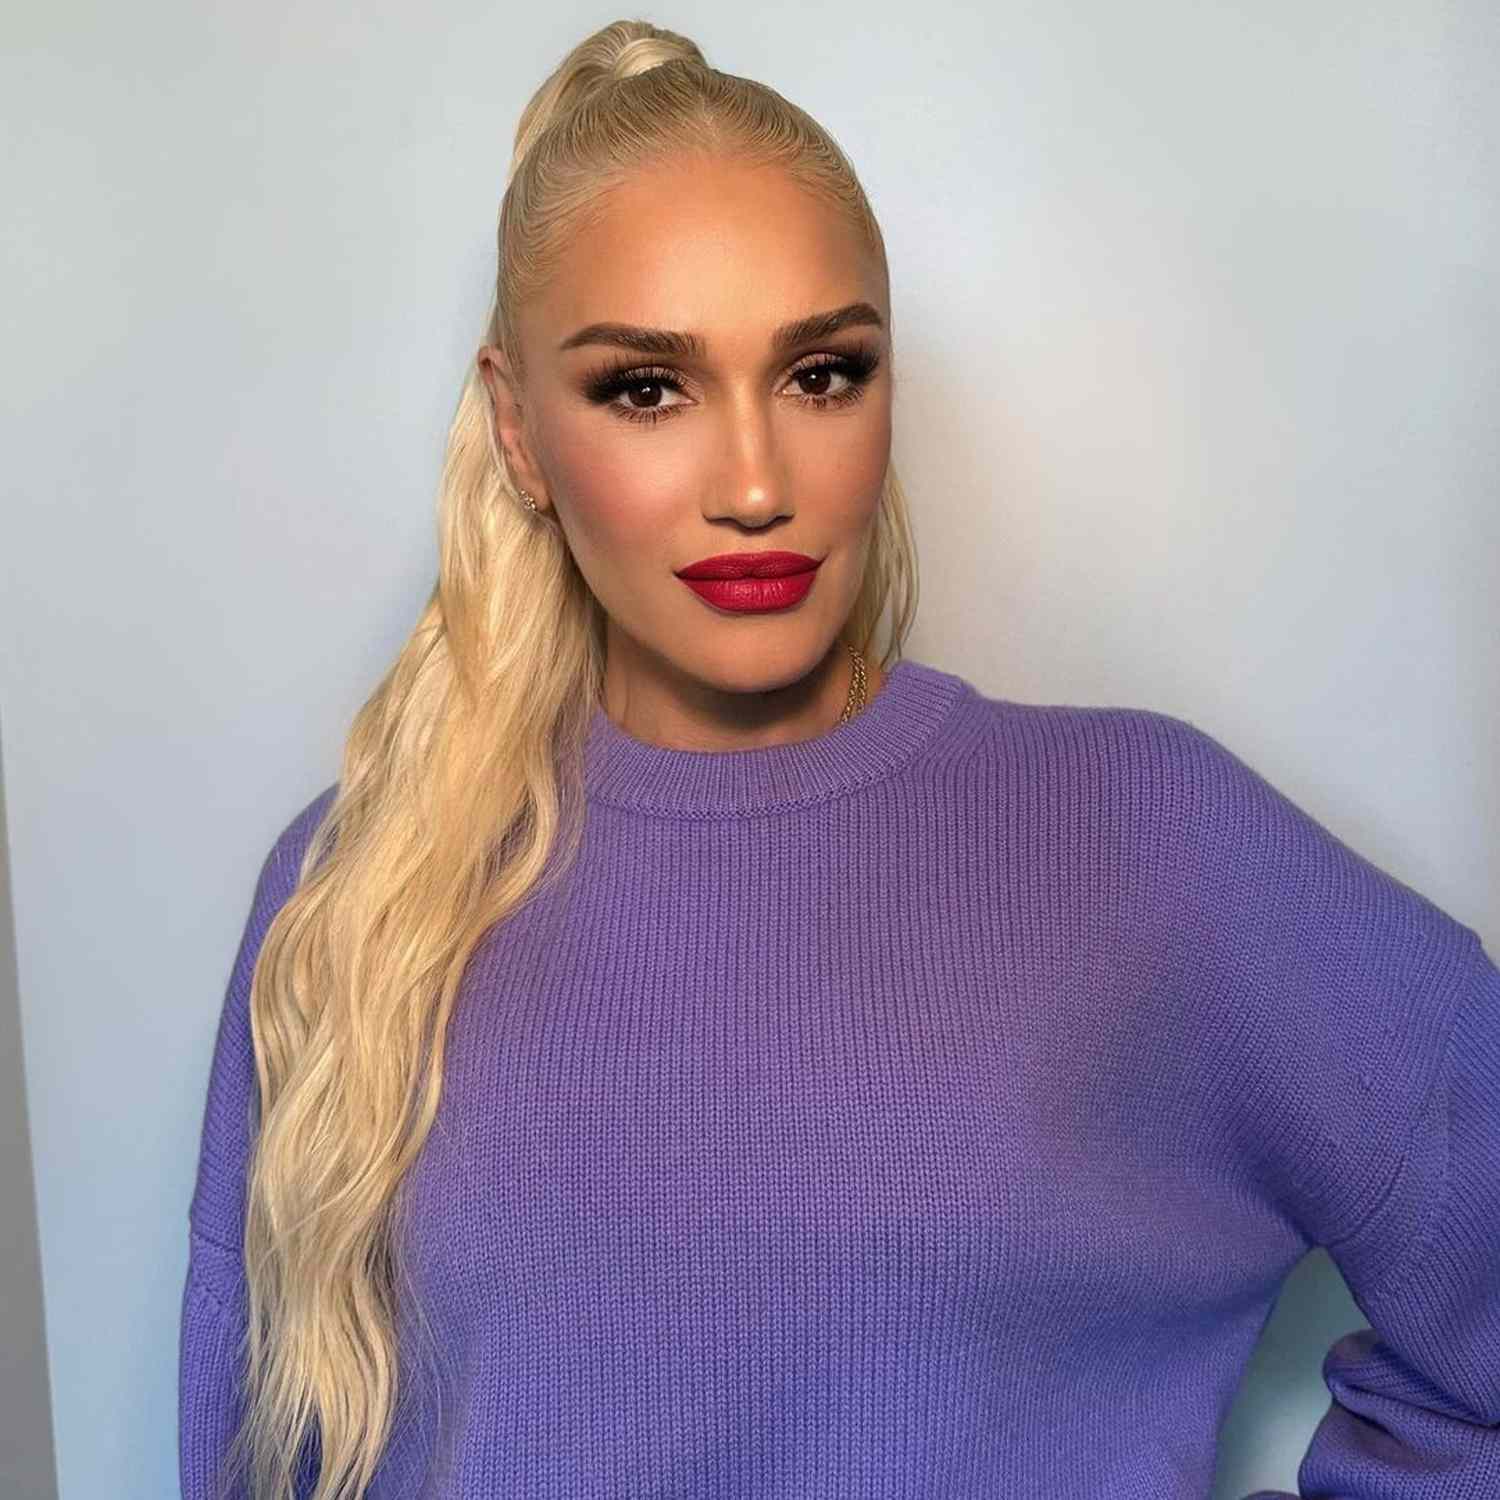 Gwen Stefani wears a high ponytail hairstyle with sleek roots and wavy ends